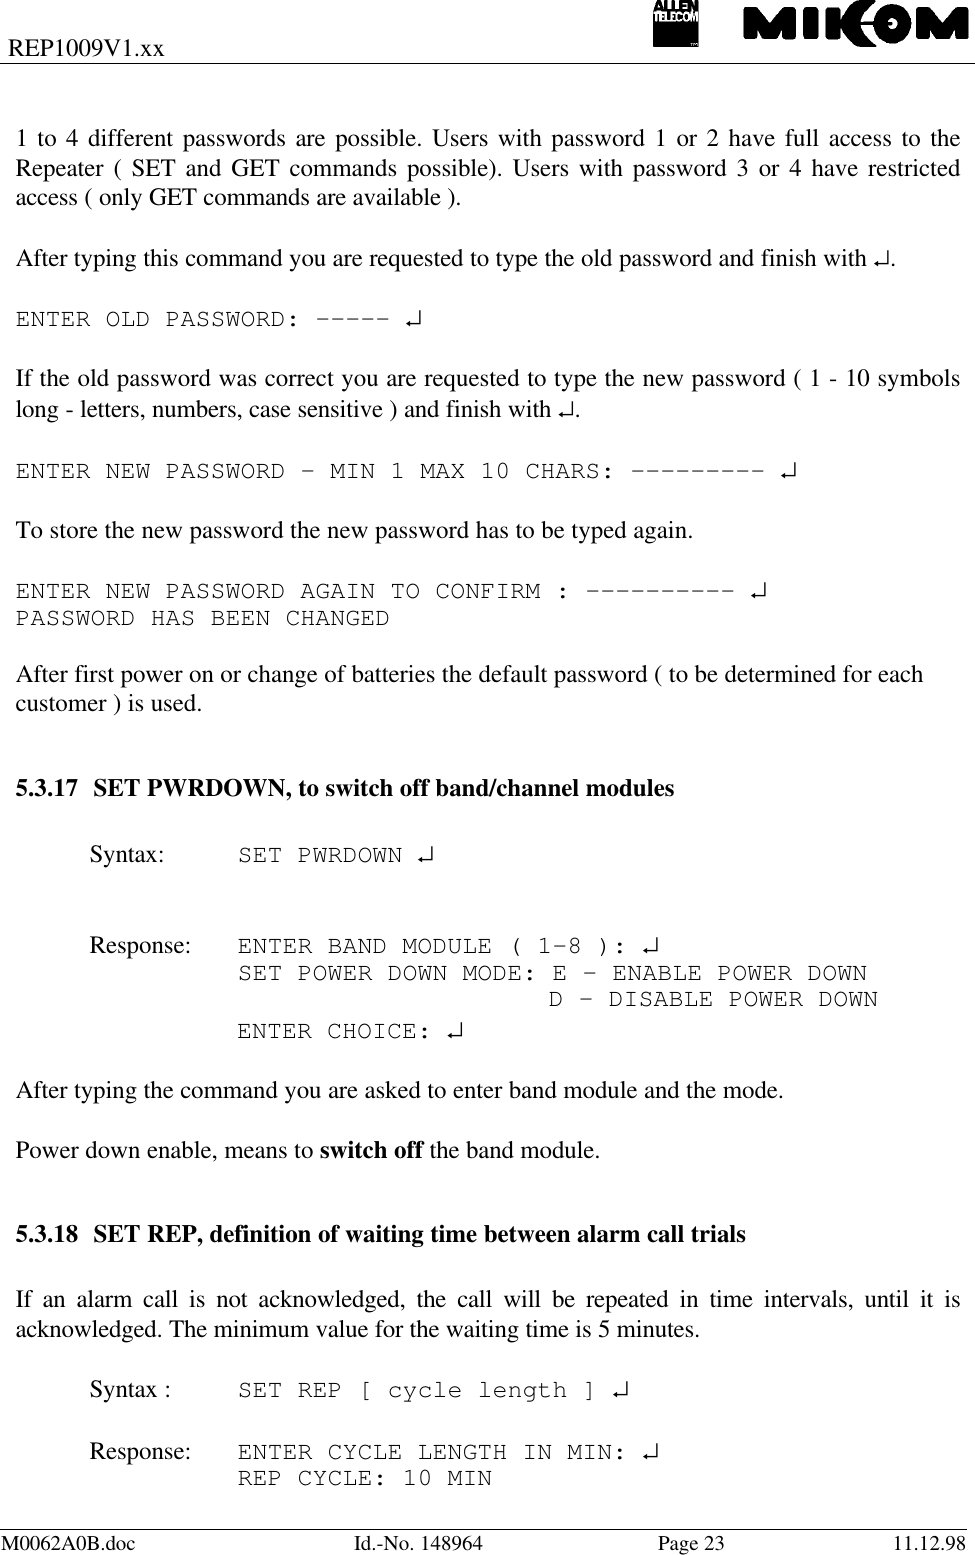 REP1009V1.xxM0062A0B.doc Id.-No. 148964 Page 23 11.12.981 to 4 different passwords are possible. Users with password 1 or 2 have full access to theRepeater ( SET and GET commands possible). Users with password 3 or 4 have restrictedaccess ( only GET commands are available ).After typing this command you are requested to type the old password and finish with ↵.ENTER OLD PASSWORD: ----- ↵If the old password was correct you are requested to type the new password ( 1 - 10 symbolslong - letters, numbers, case sensitive ) and finish with ↵.ENTER NEW PASSWORD – MIN 1 MAX 10 CHARS: --------- ↵To store the new password the new password has to be typed again.ENTER NEW PASSWORD AGAIN TO CONFIRM : ---------- ↵PASSWORD HAS BEEN CHANGEDAfter first power on or change of batteries the default password ( to be determined for eachcustomer ) is used.5.3.17 SET PWRDOWN, to switch off band/channel modulesSyntax: SET PWRDOWN ↵Response: ENTER BAND MODULE ( 1-8 ): ↵SET POWER DOWN MODE: E - ENABLE POWER DOWN D - DISABLE POWER DOWNENTER CHOICE: ↵After typing the command you are asked to enter band module and the mode.Power down enable, means to switch off the band module.5.3.18 SET REP, definition of waiting time between alarm call trialsIf an alarm call is not acknowledged, the call will be repeated in time intervals, until it isacknowledged. The minimum value for the waiting time is 5 minutes.Syntax : SET REP [ cycle length ] ↵Response: ENTER CYCLE LENGTH IN MIN: ↵REP CYCLE: 10 MIN